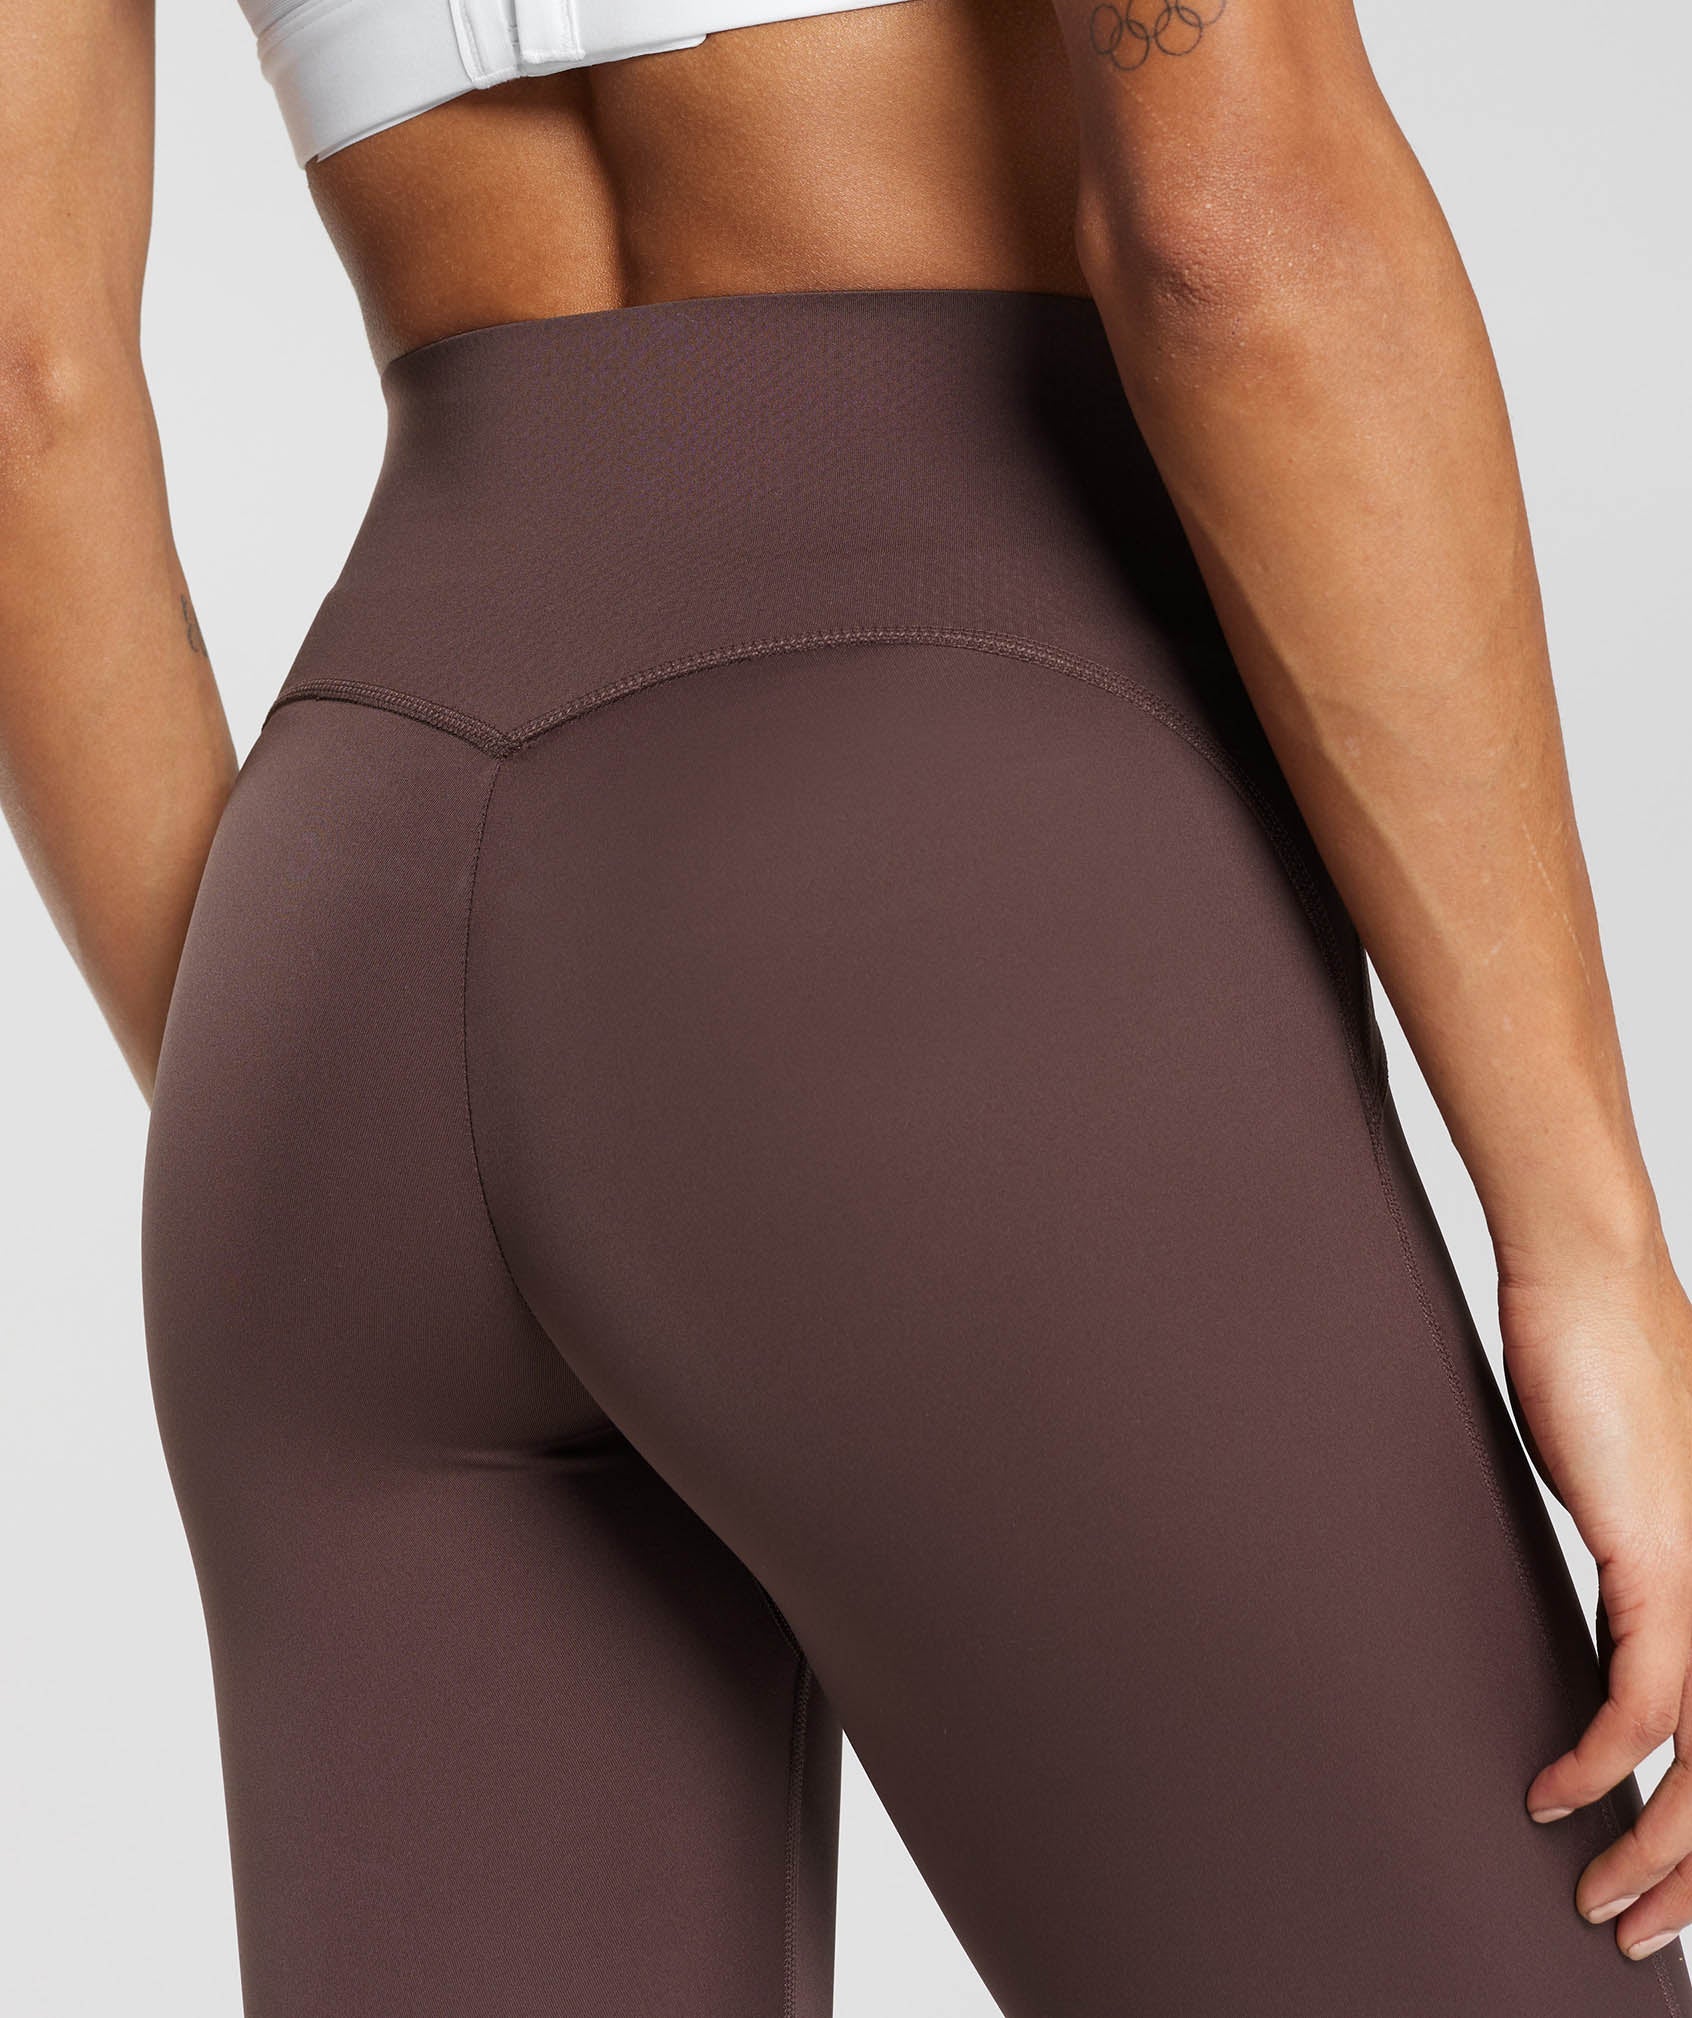 Waist Support Leggings in Chocolate Brown - view 5